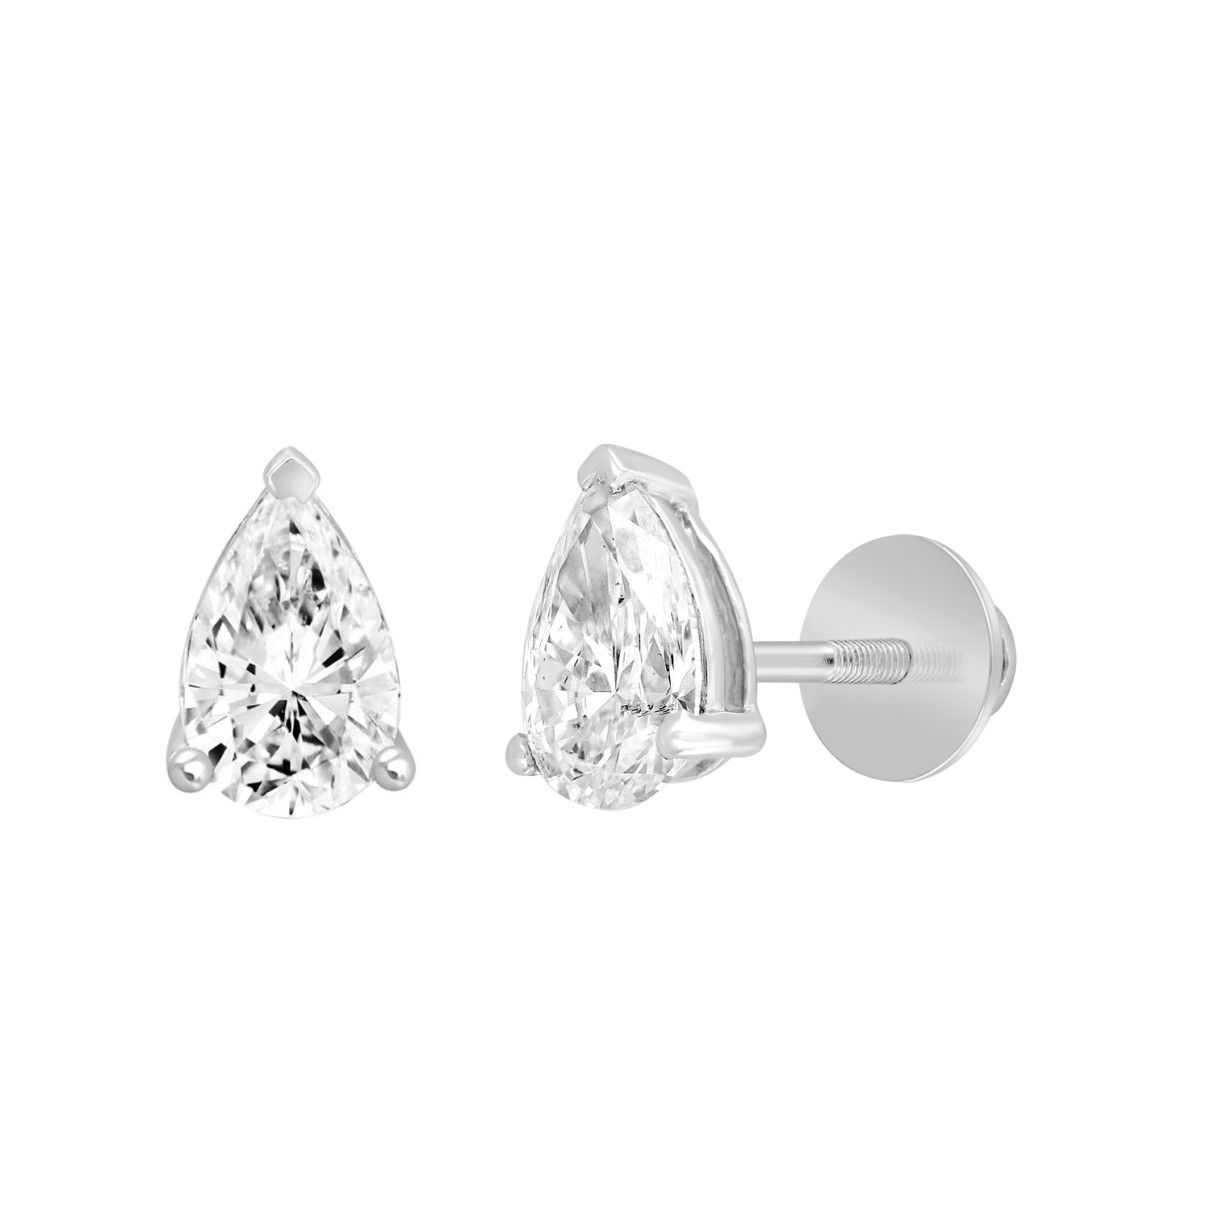 LADIES SOLITAIRE EARRINGS 1CT PEAR DIAMOND 14K WHITE GOLD